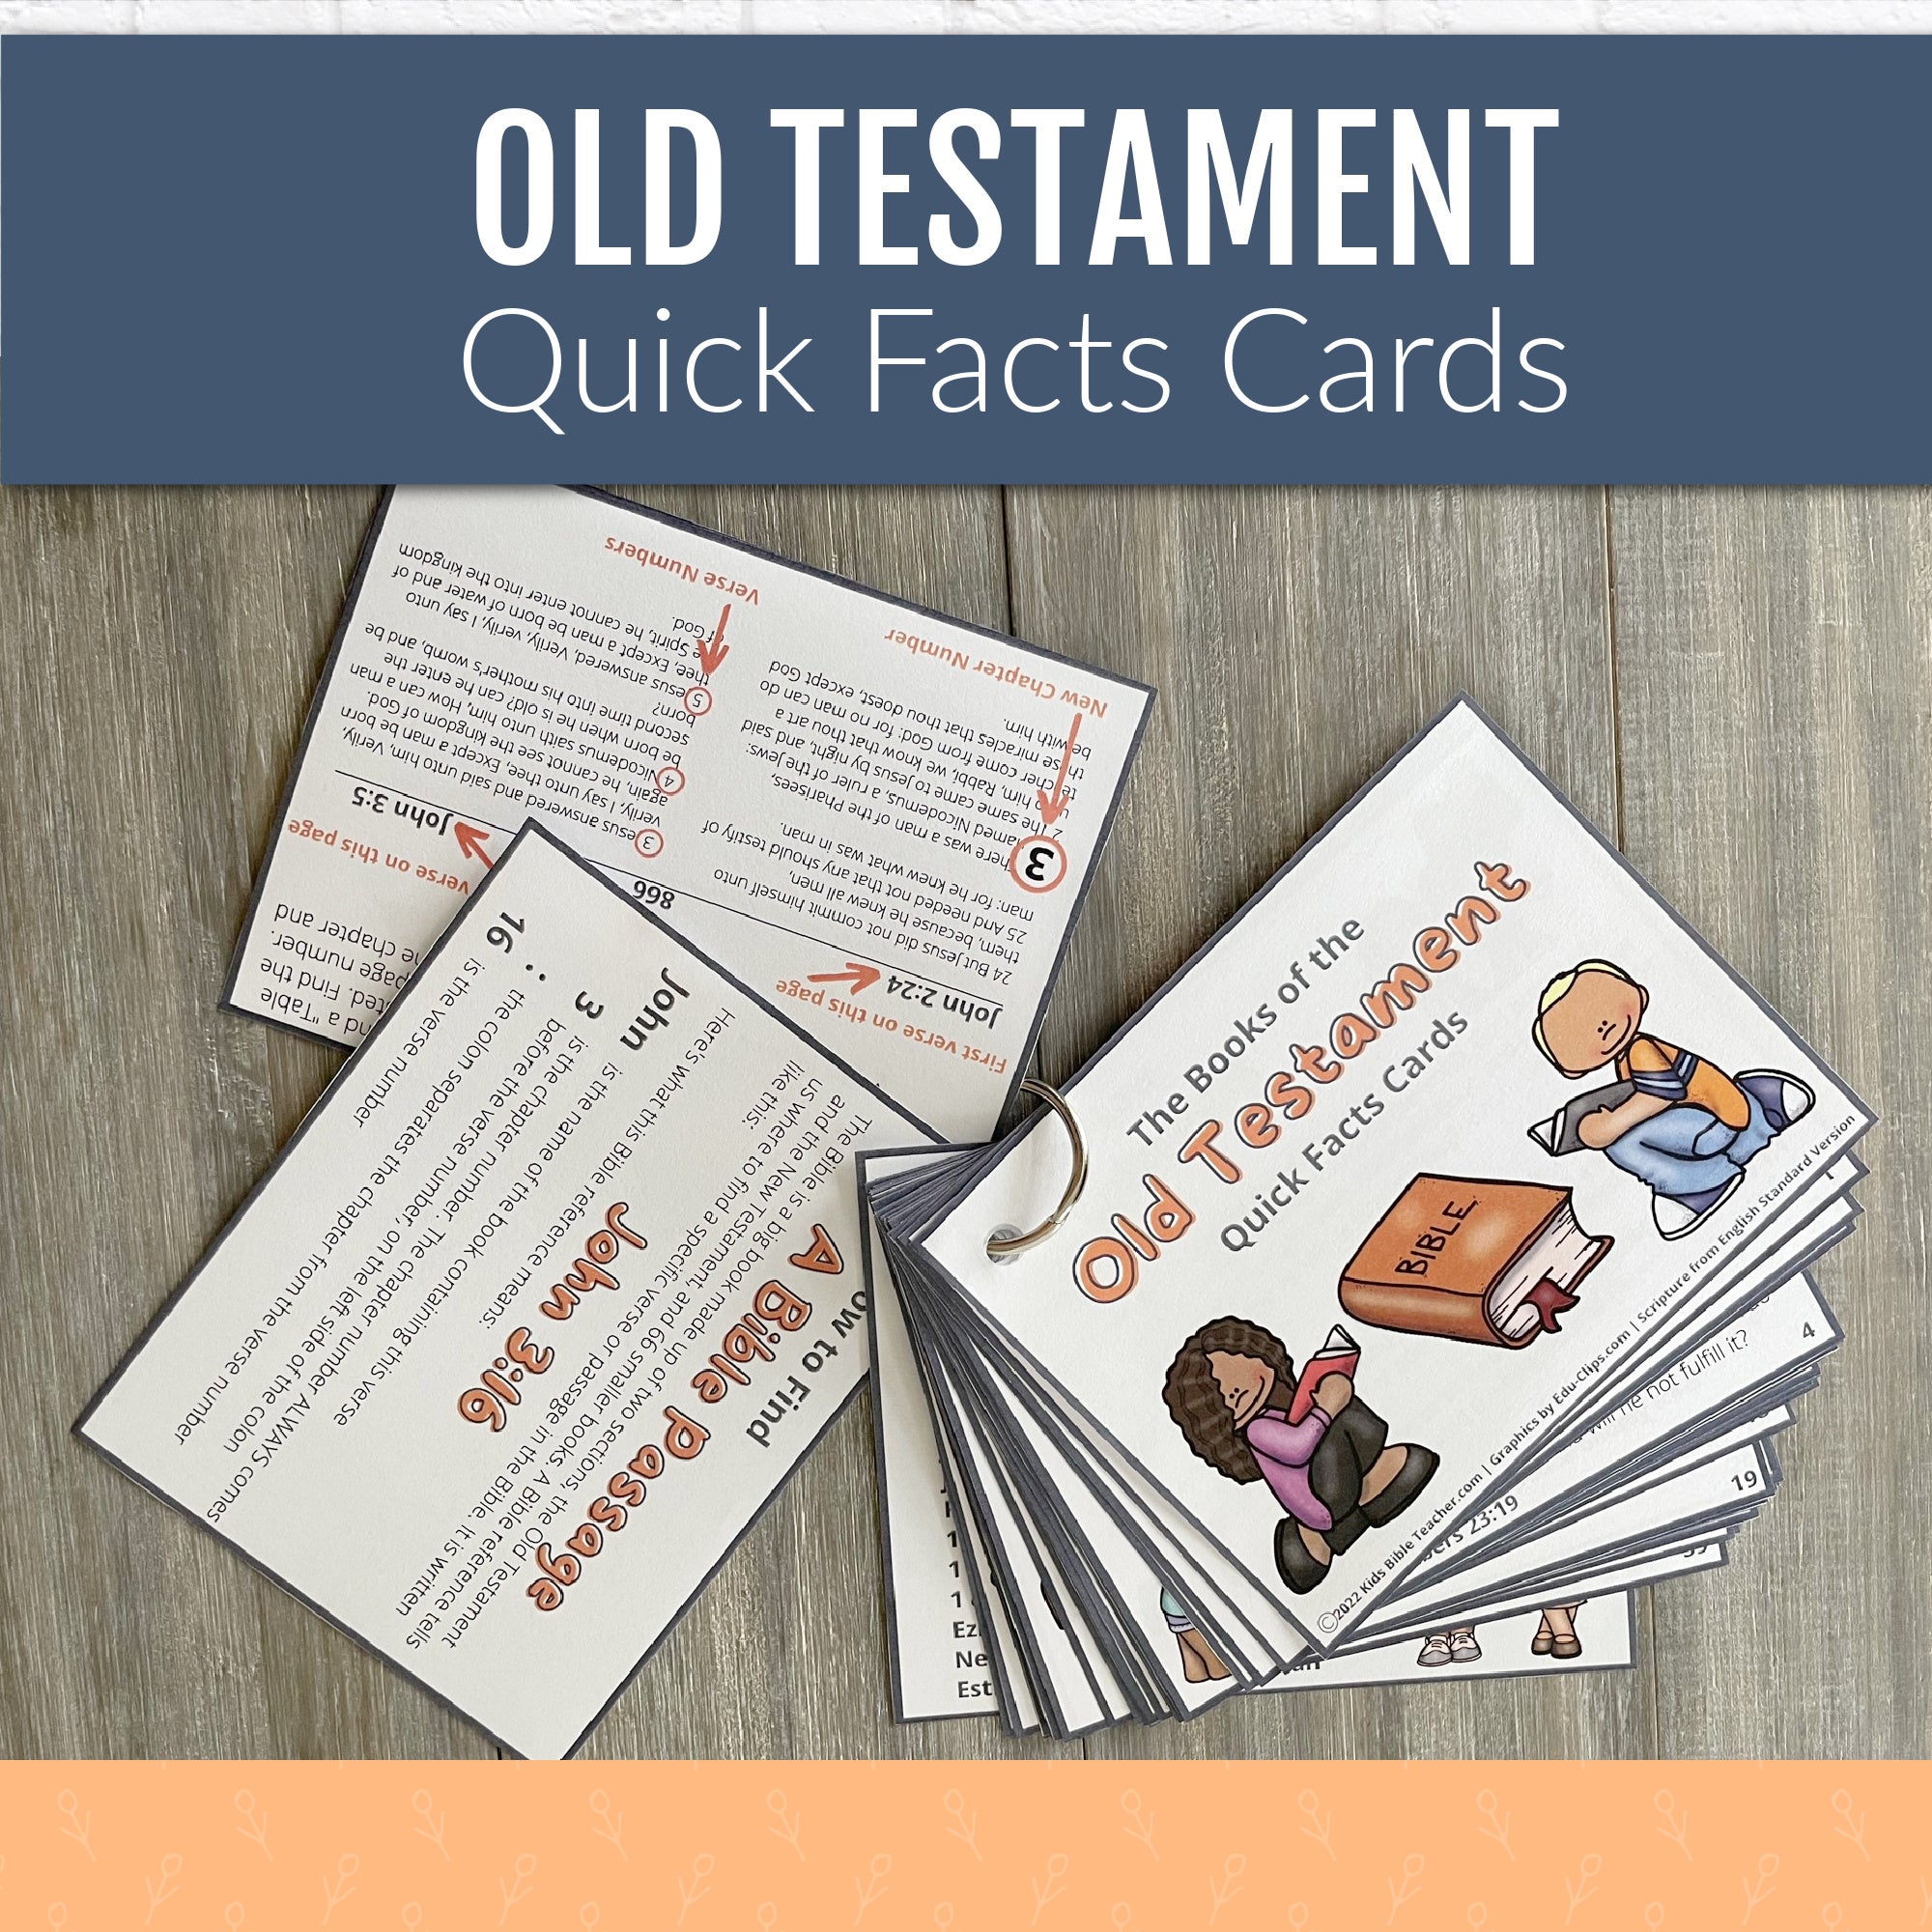 Old Testament Books of the Bible Quick Facts Cards